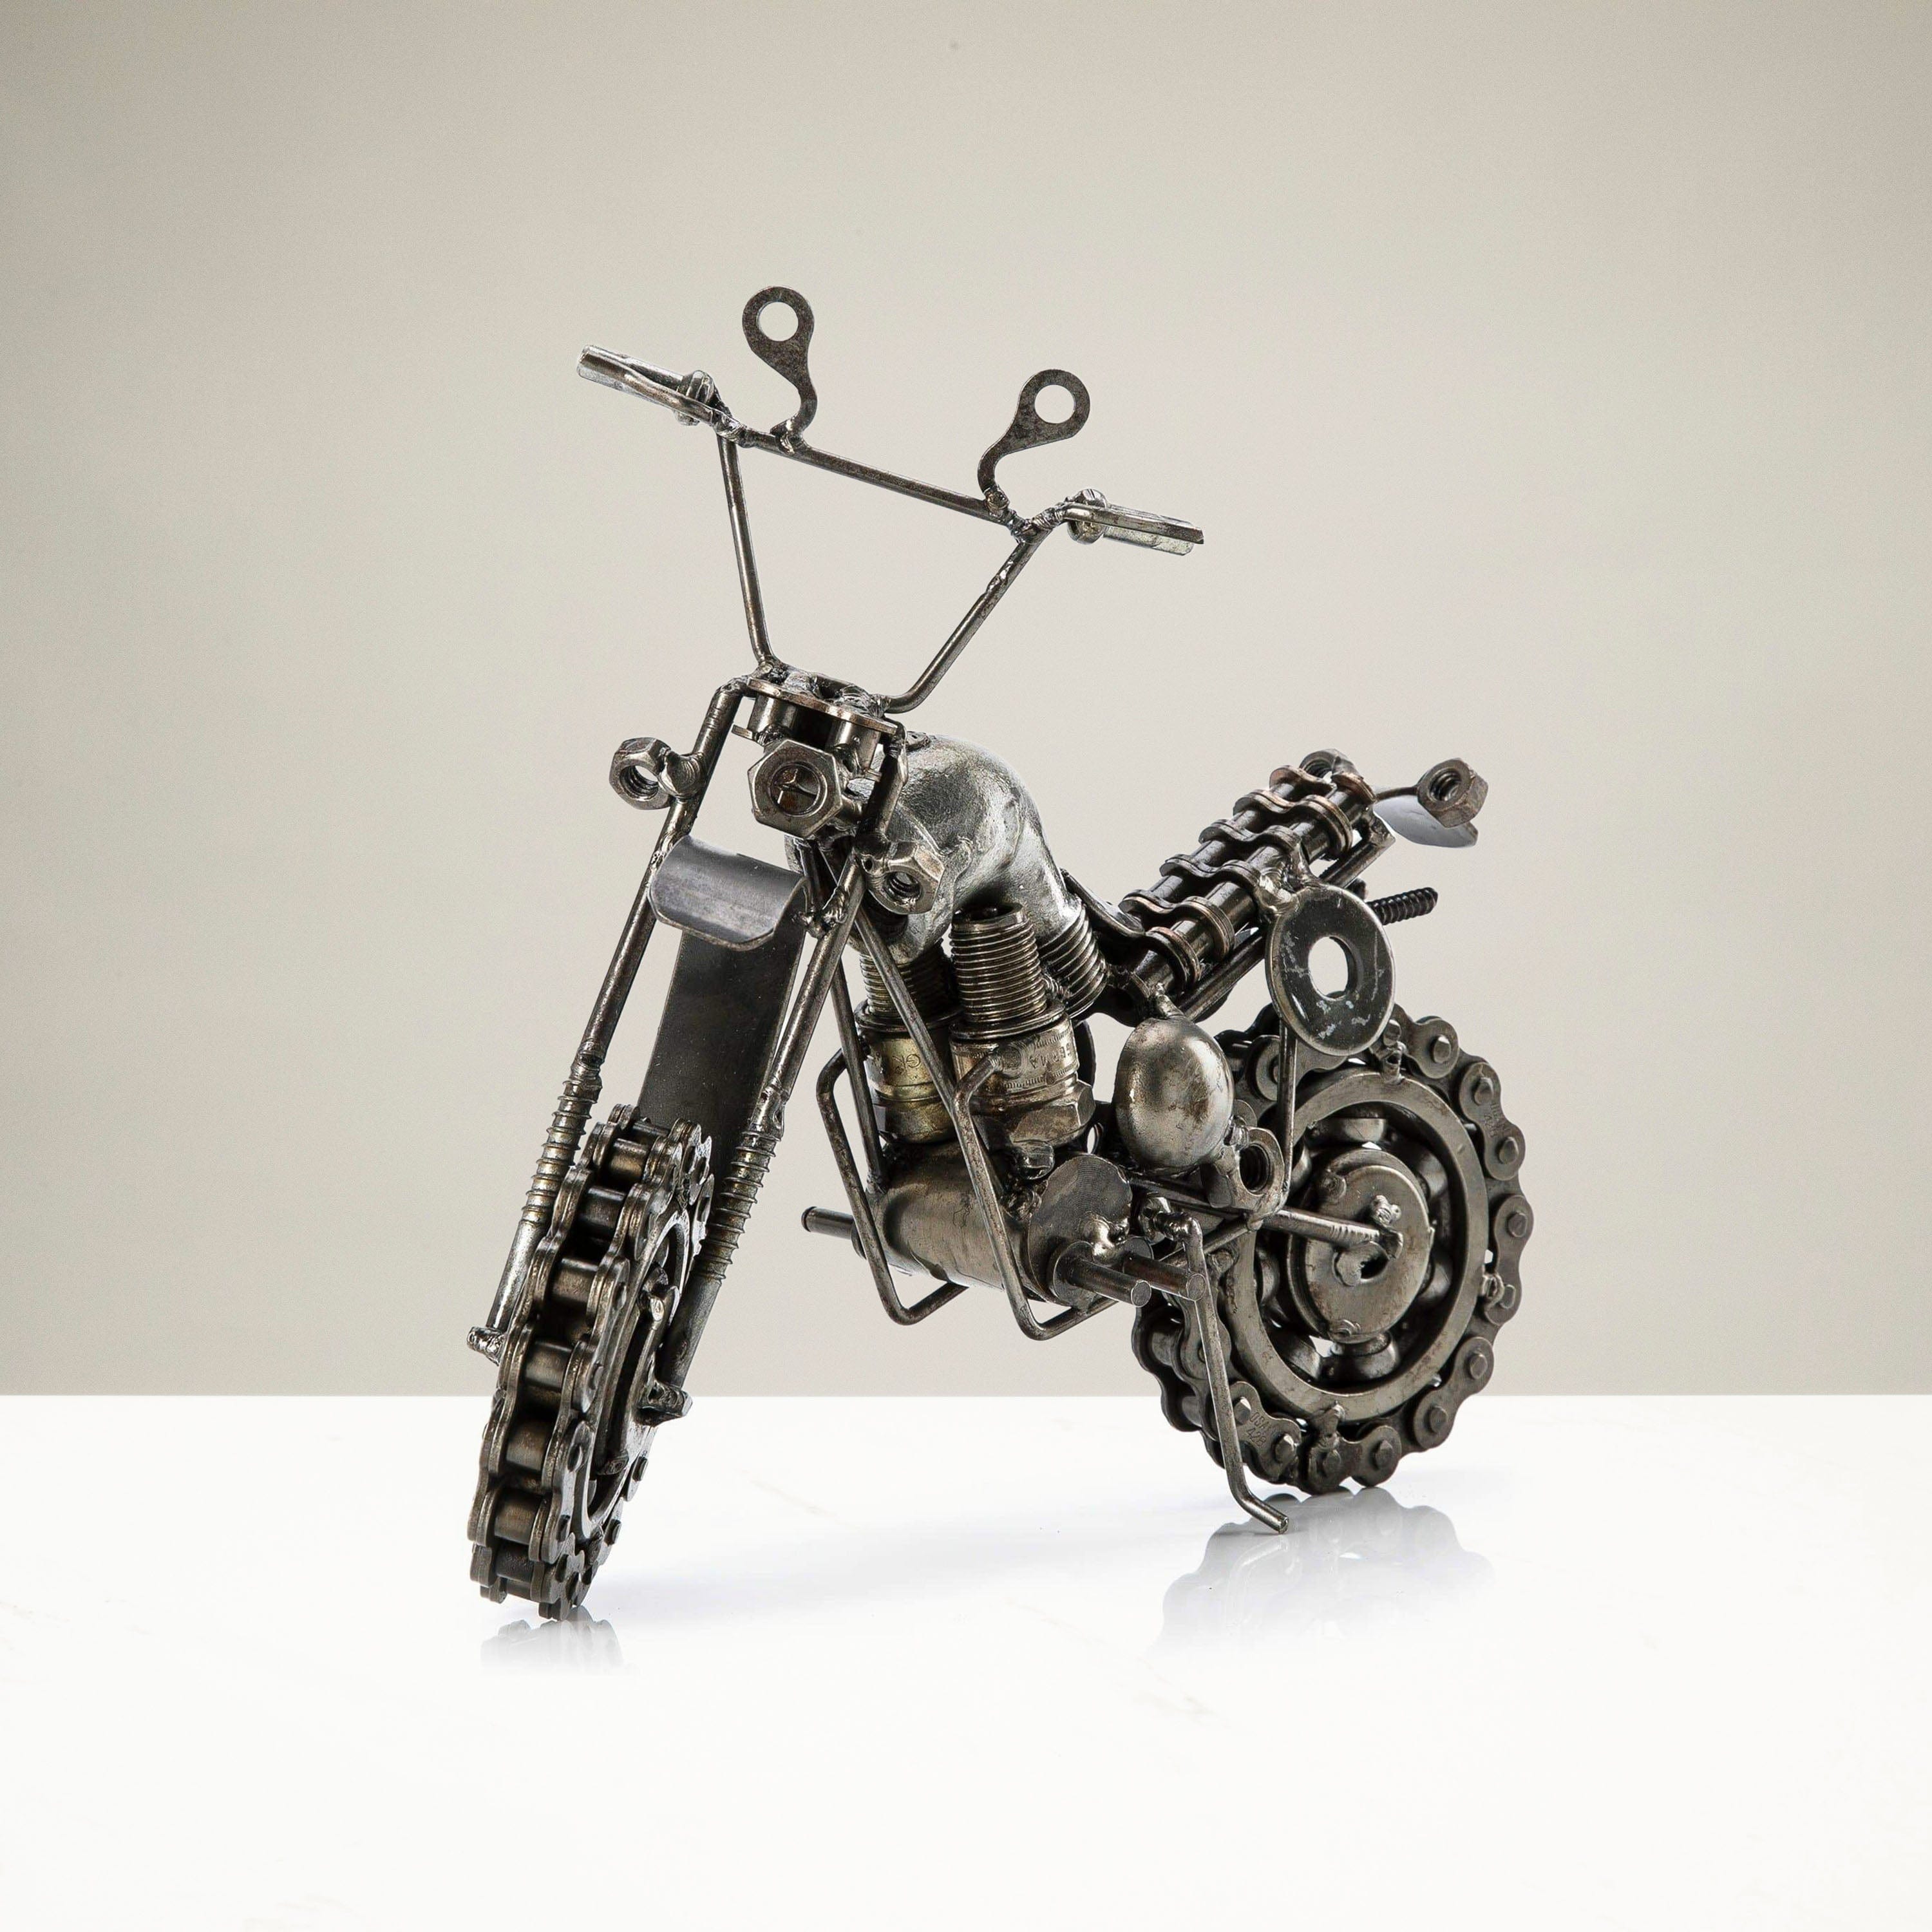 Motocross Inspired Recycled Metal Sculpture